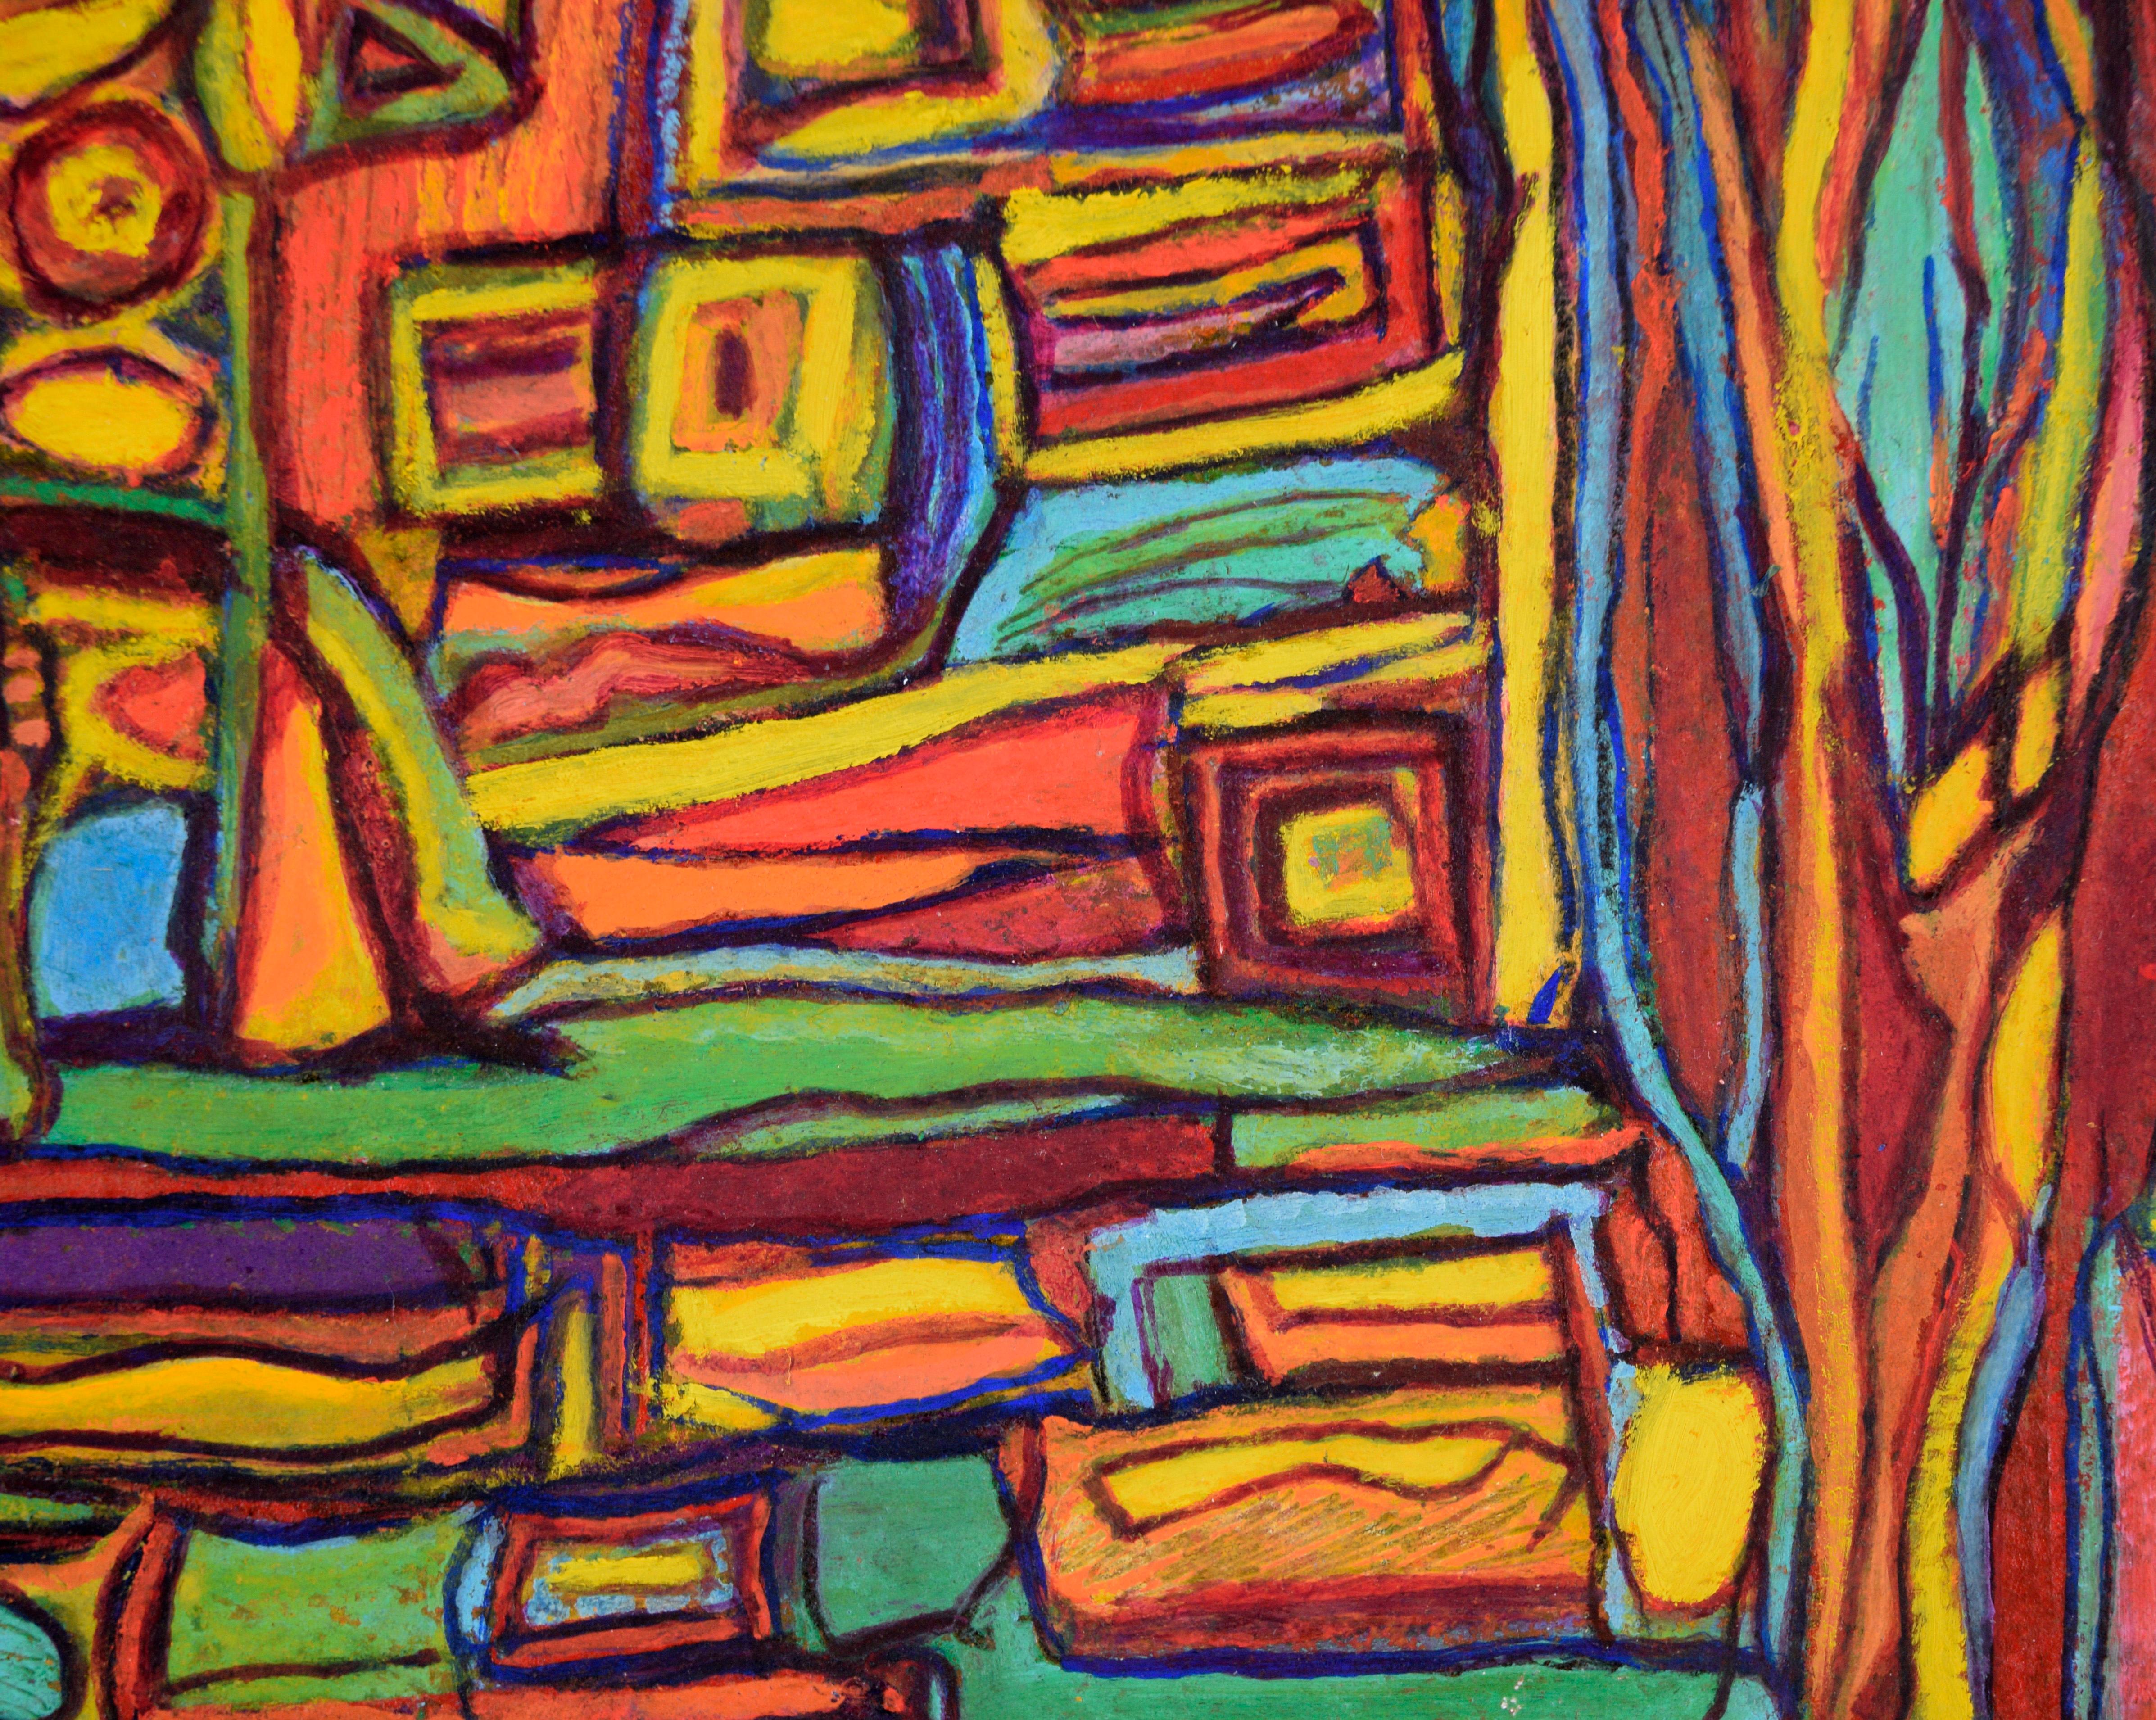 Psychedelic Abstract in Yellow, Teal, and Orange - Oil on Paper - Beige Abstract Painting by Jennie Rafton